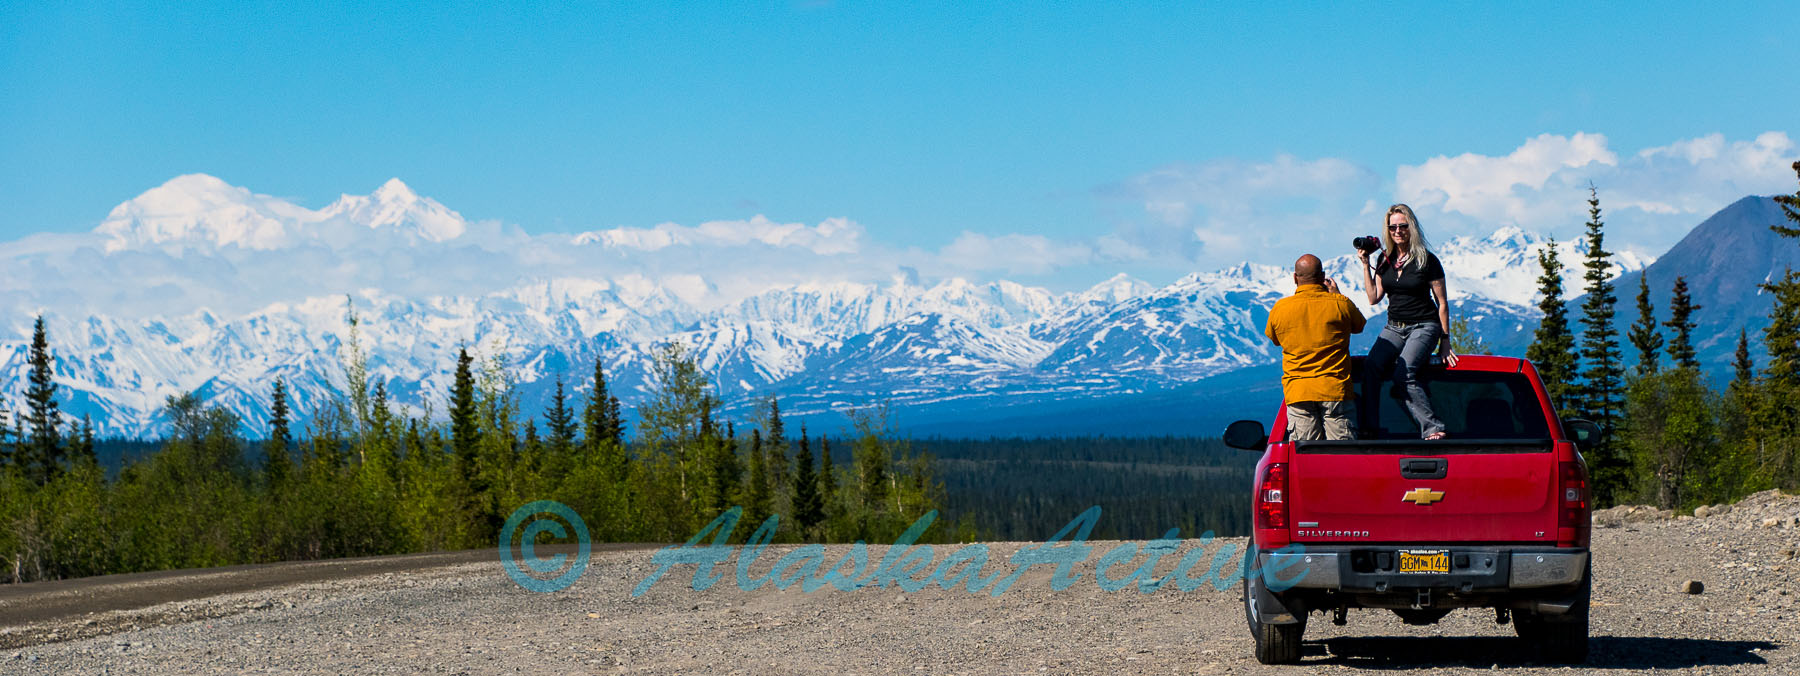 Road Trip Across Alaska: How to plan - Routes, Costs, Tips